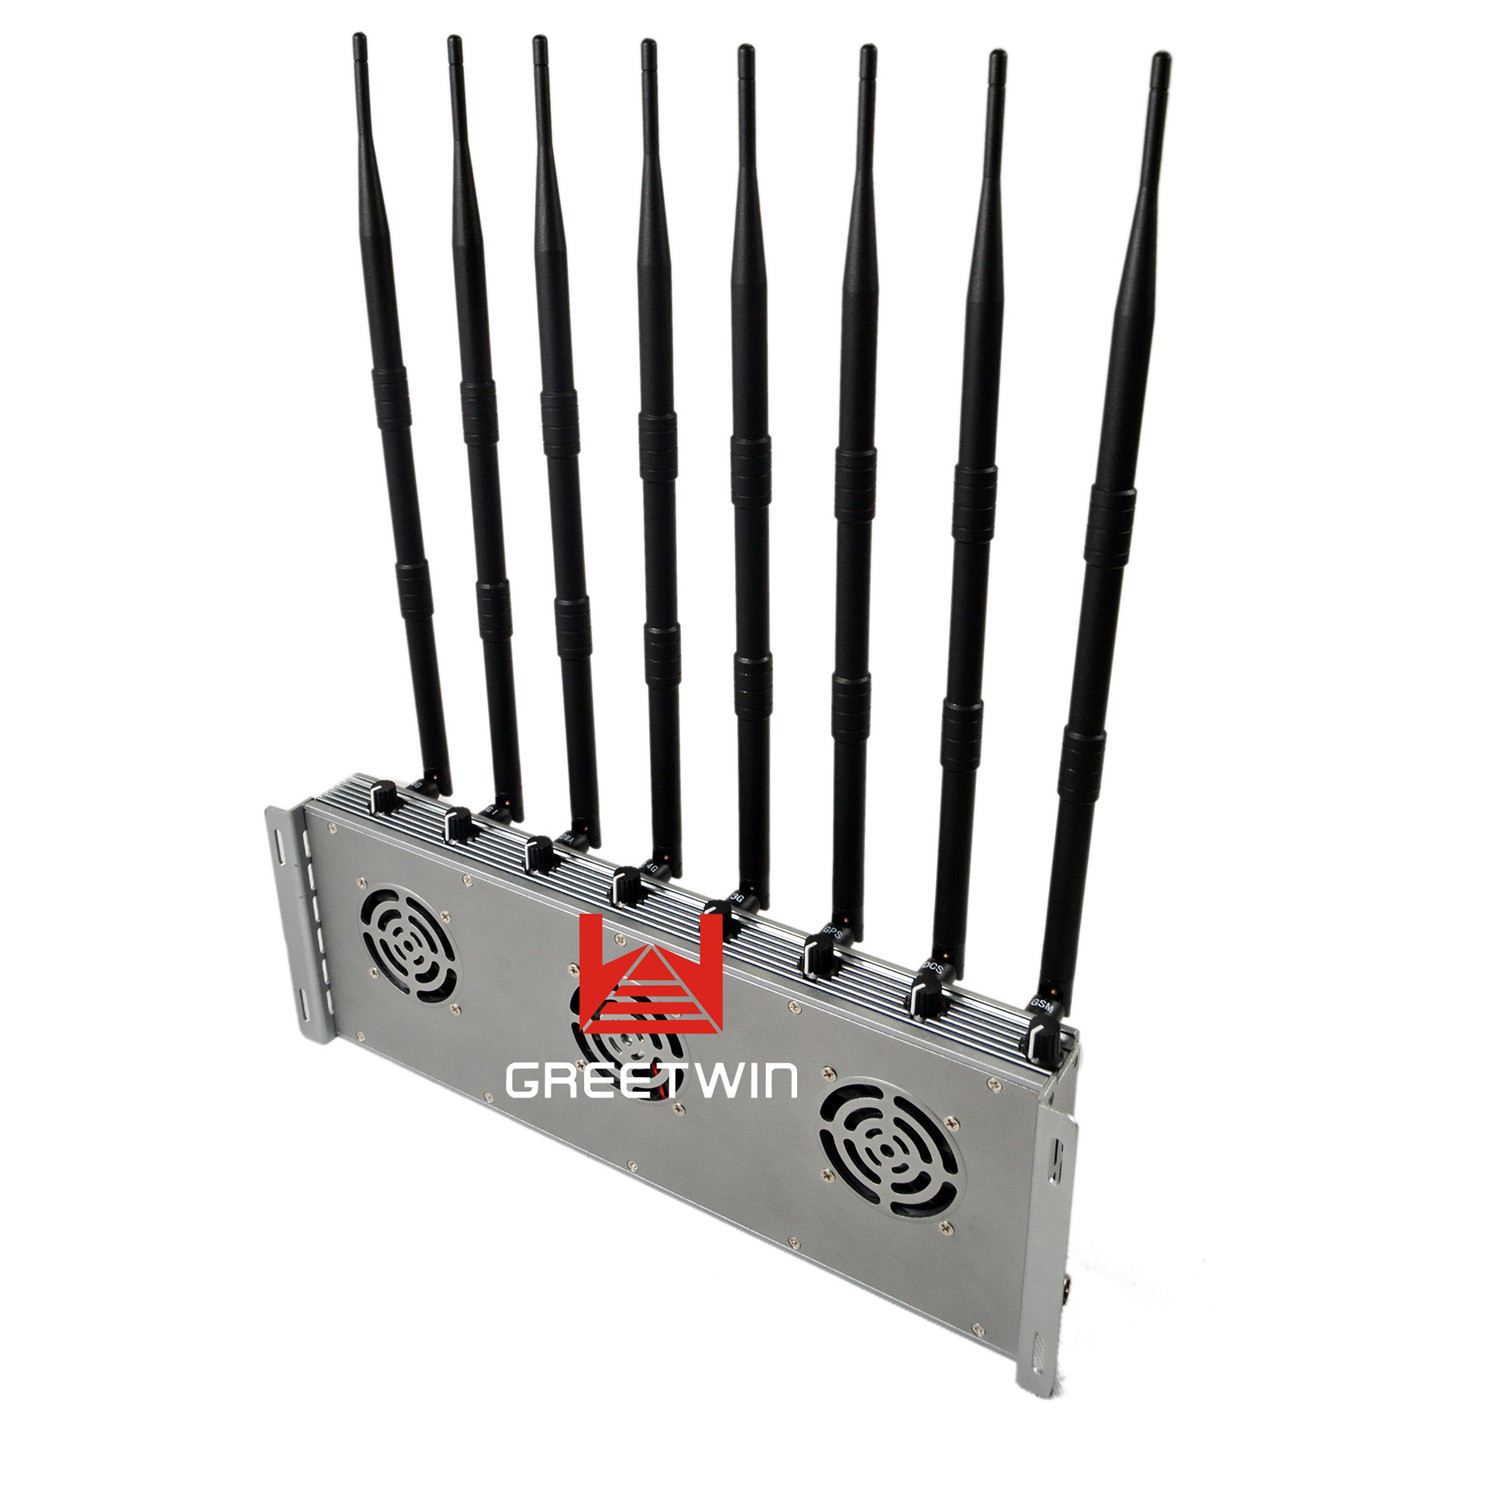 Powerful WIFI Mobile Phone Signal Jammer 8 Antennas Indoor Adjustable 46W Output Power